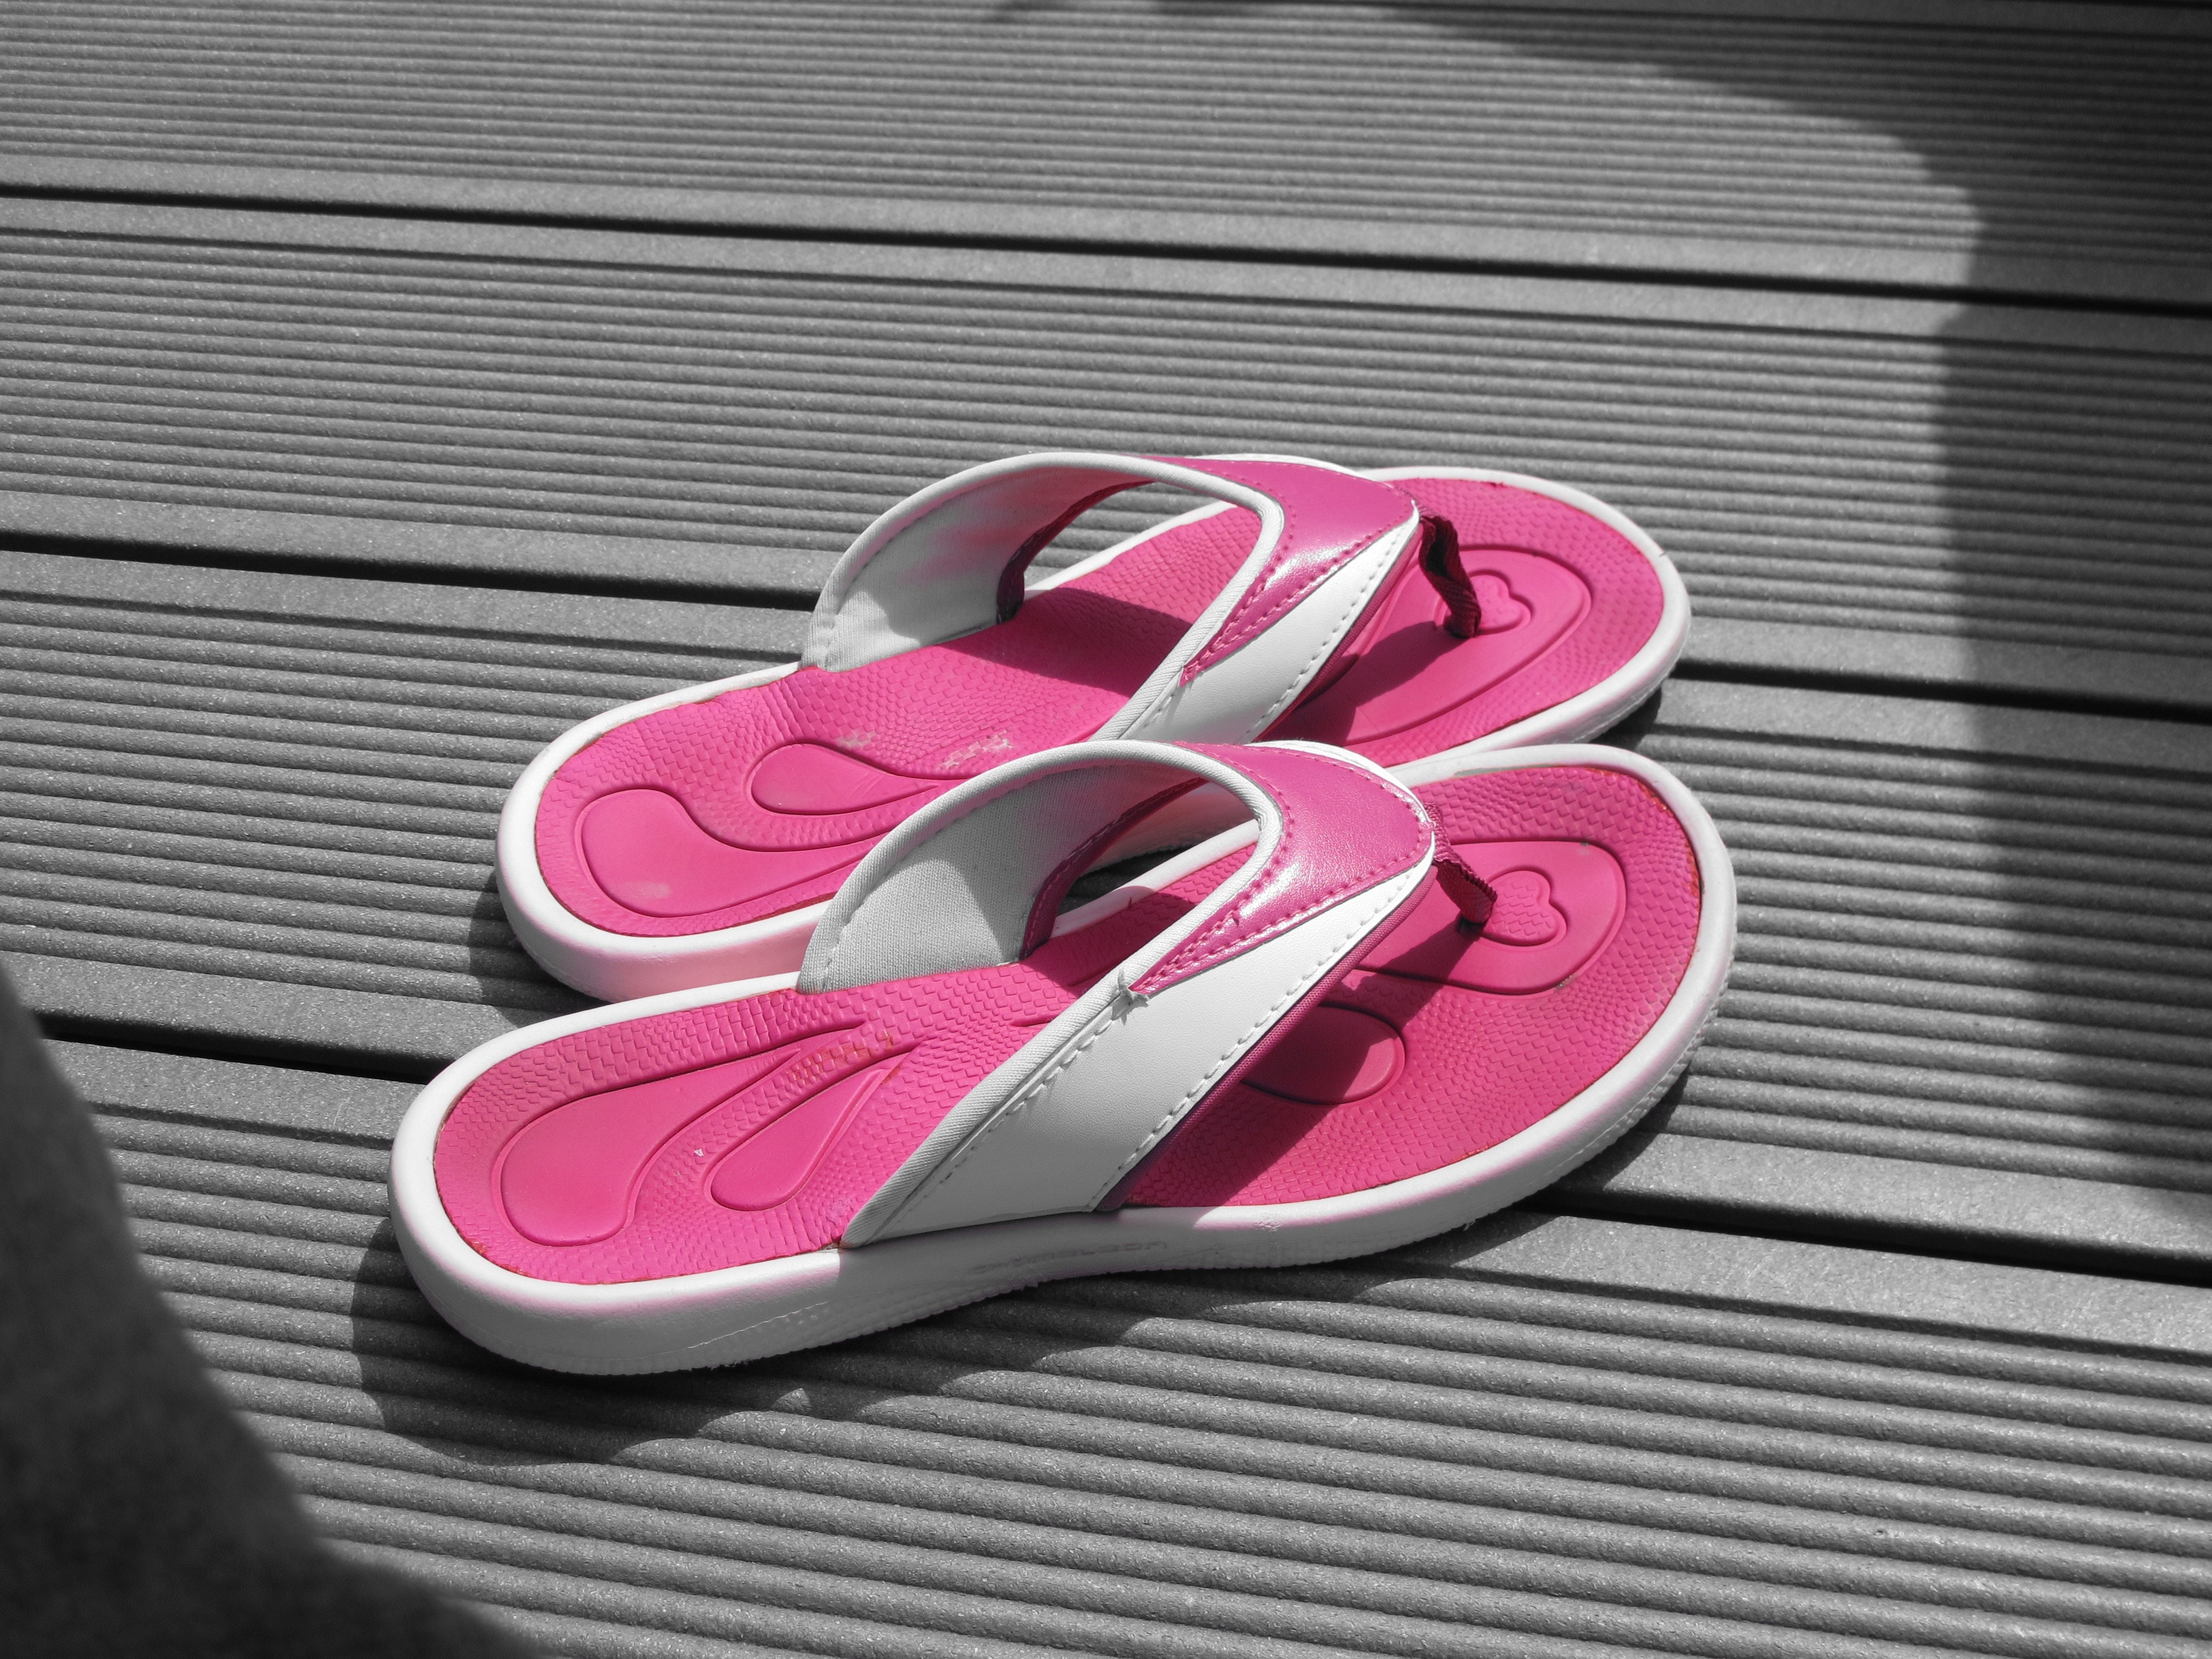 white-and-pink flipflops